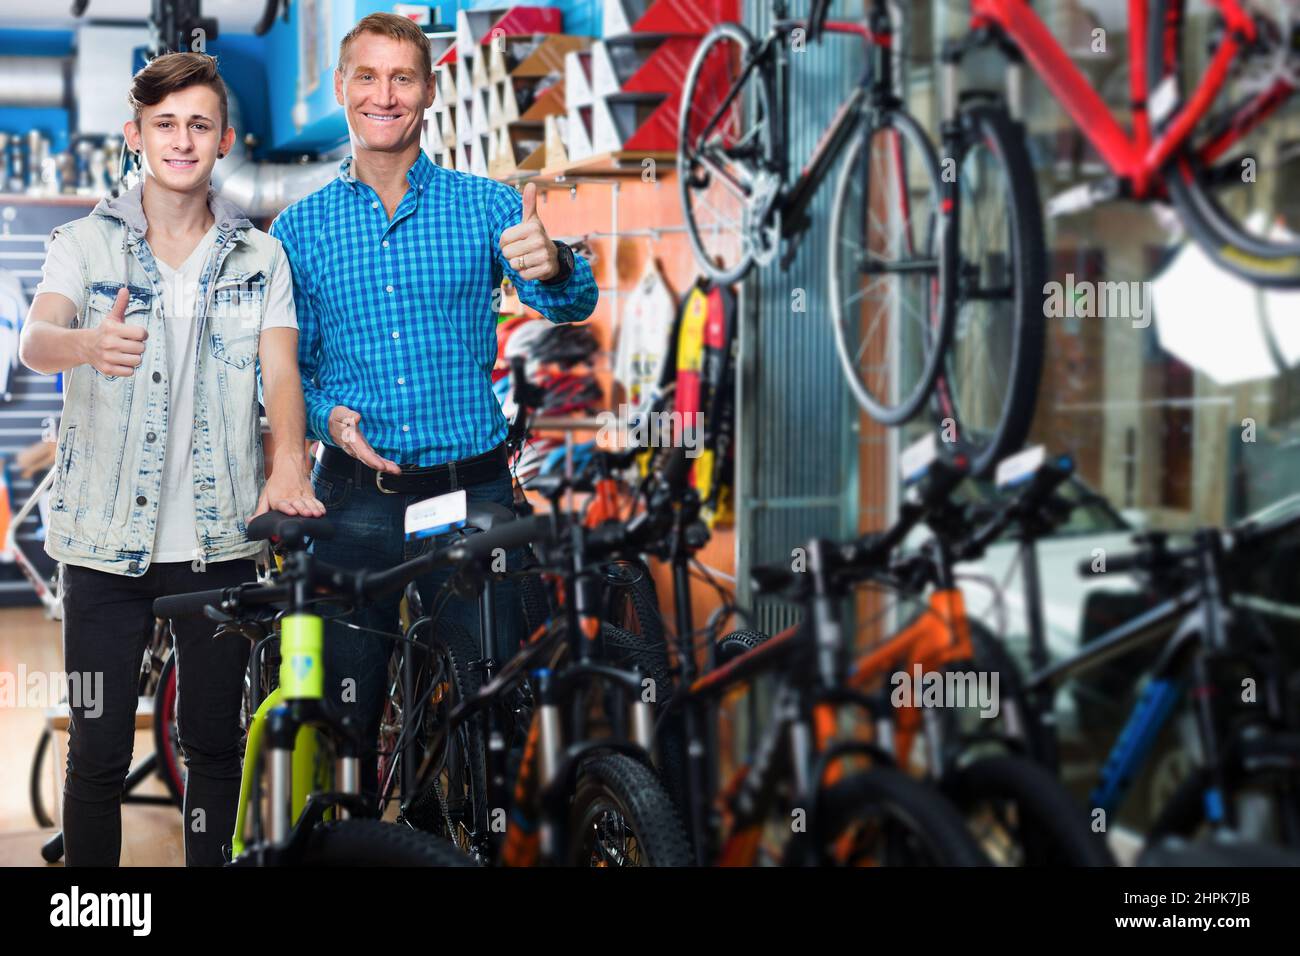 Man and boy holding thumbs up while buying new bicycle Stock Photo